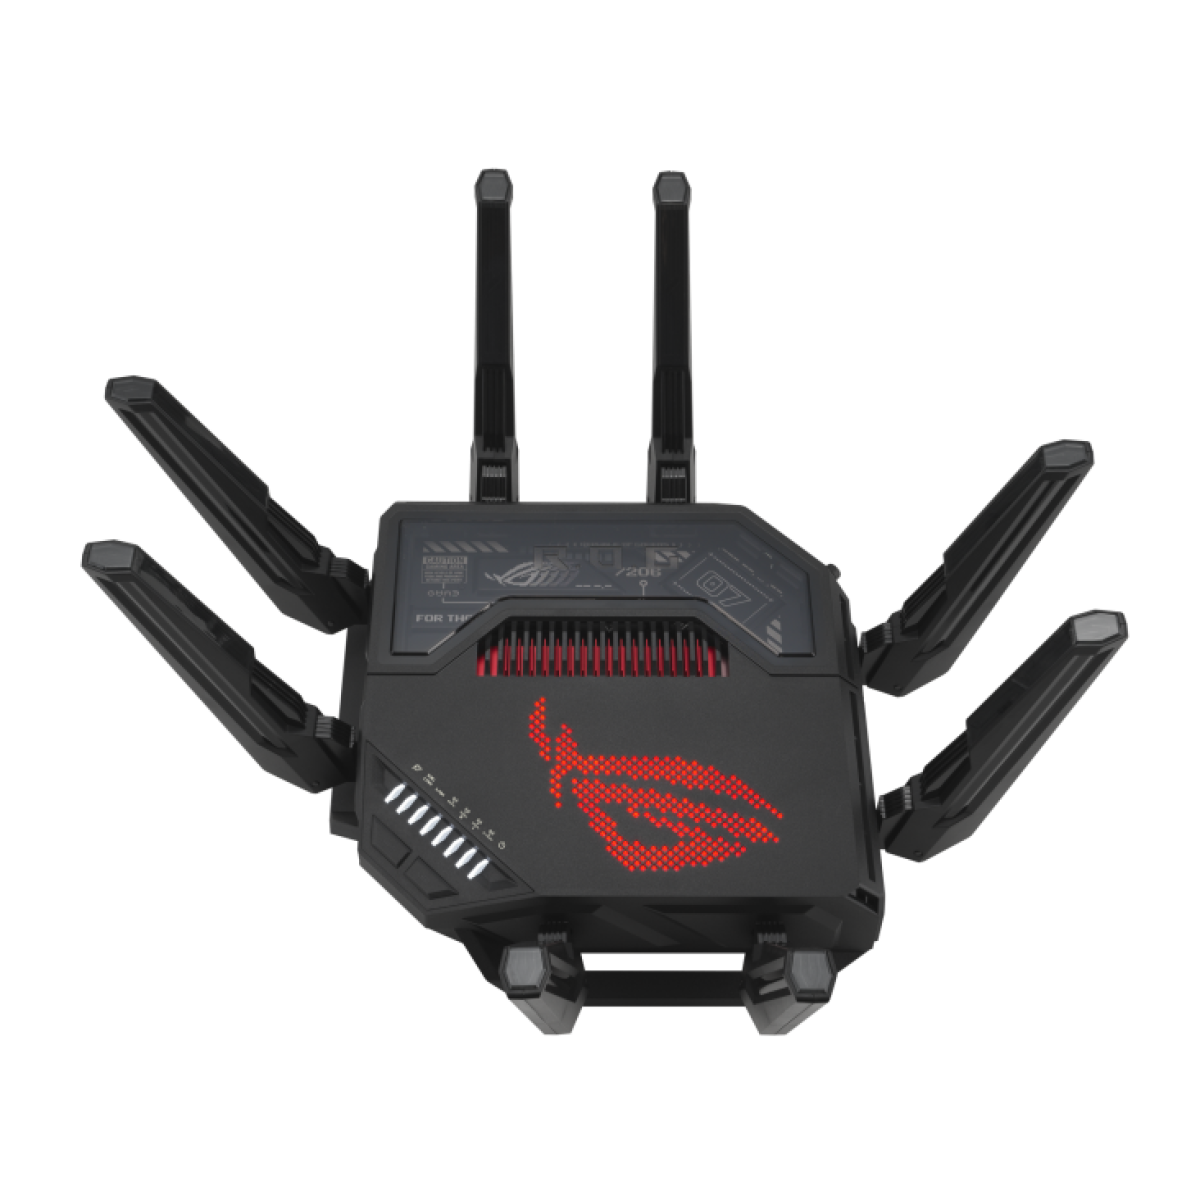 ASUS ROG Rapture GT-BE98 Quad-Band WiFi 7 Gaming Router thumbnail 5